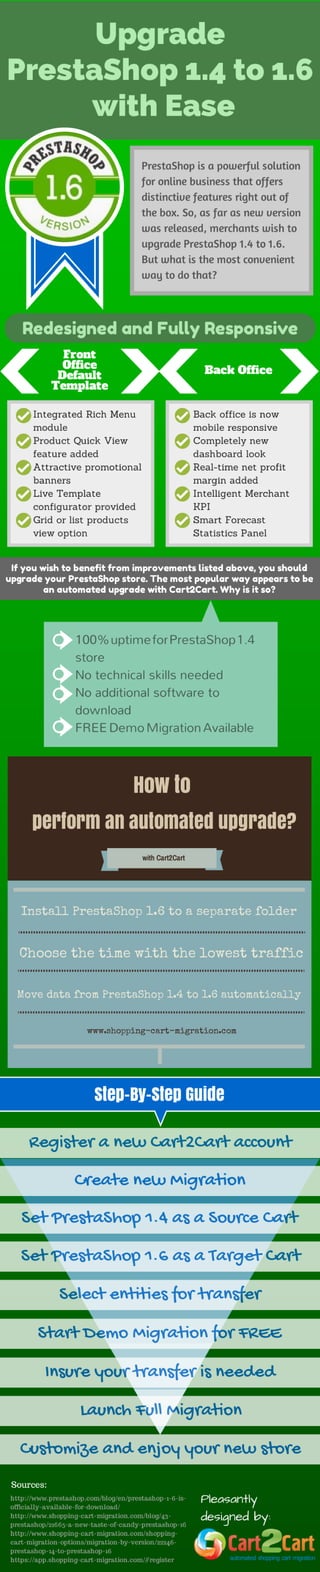 How To Upgrade PrestaShop 1.4 To 1.6 With Ease